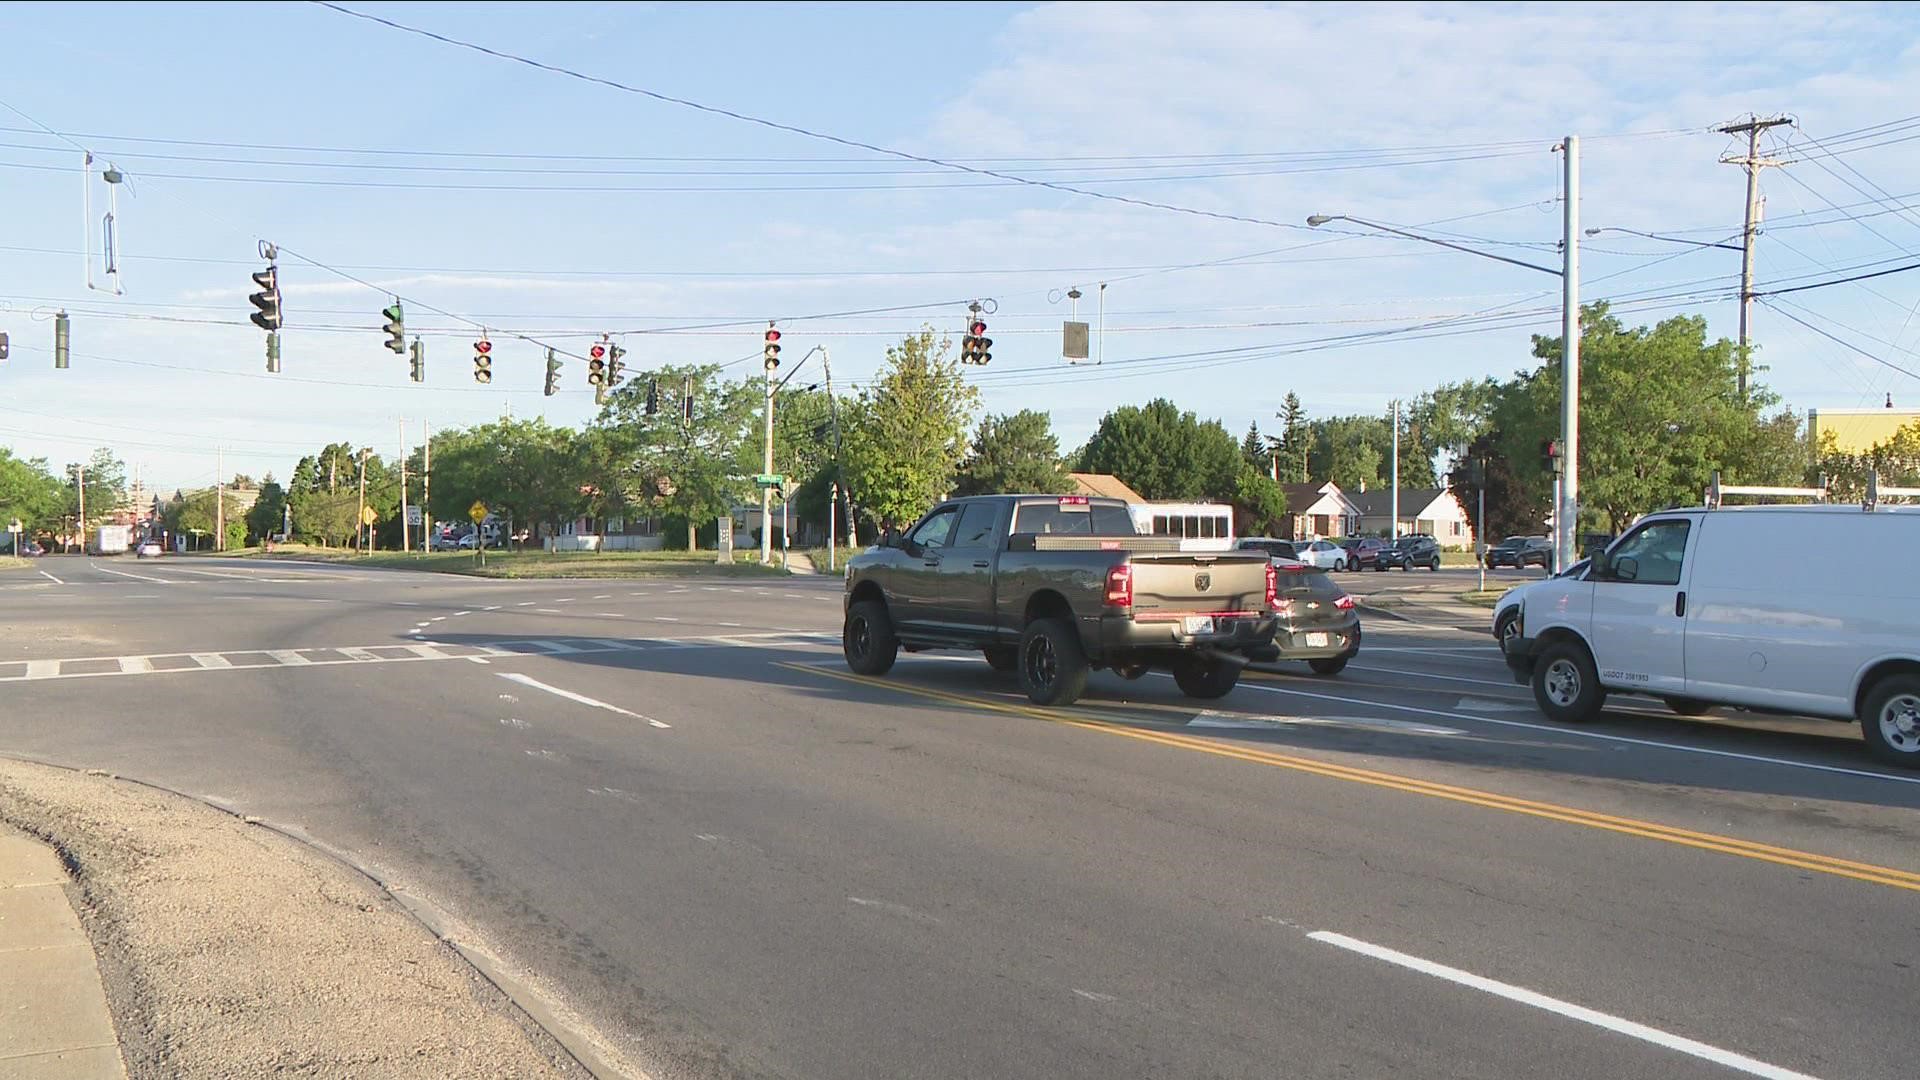 A man is in critical condition at ECMC after being hit by a car Sunday afternoon.